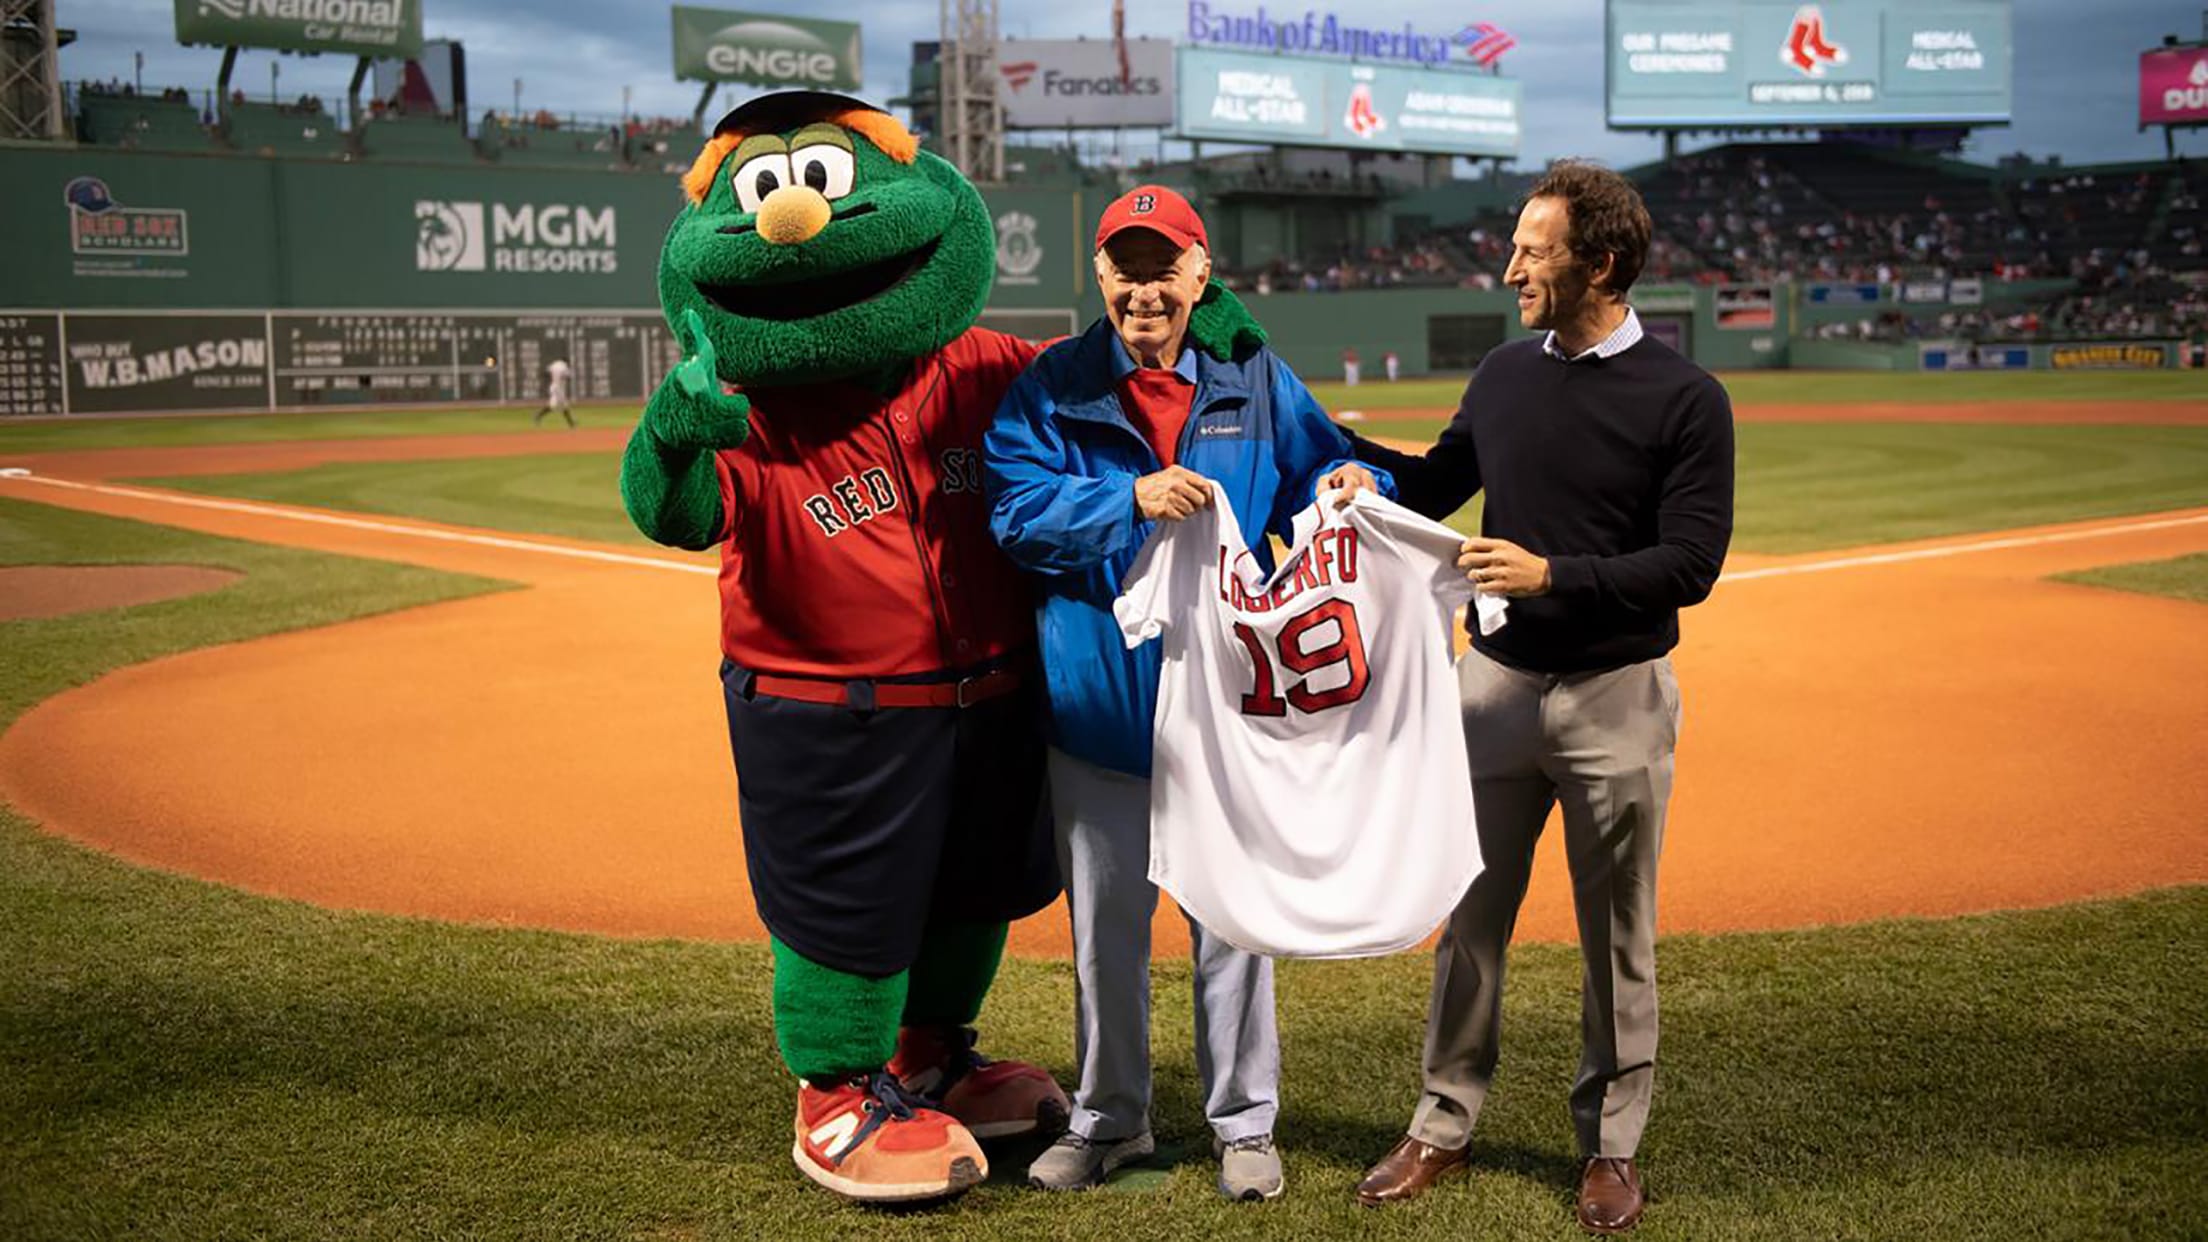 Larger-Than-Life Drone Show Celebrates MassMutual's Sponsorship of the  Boston Red Sox